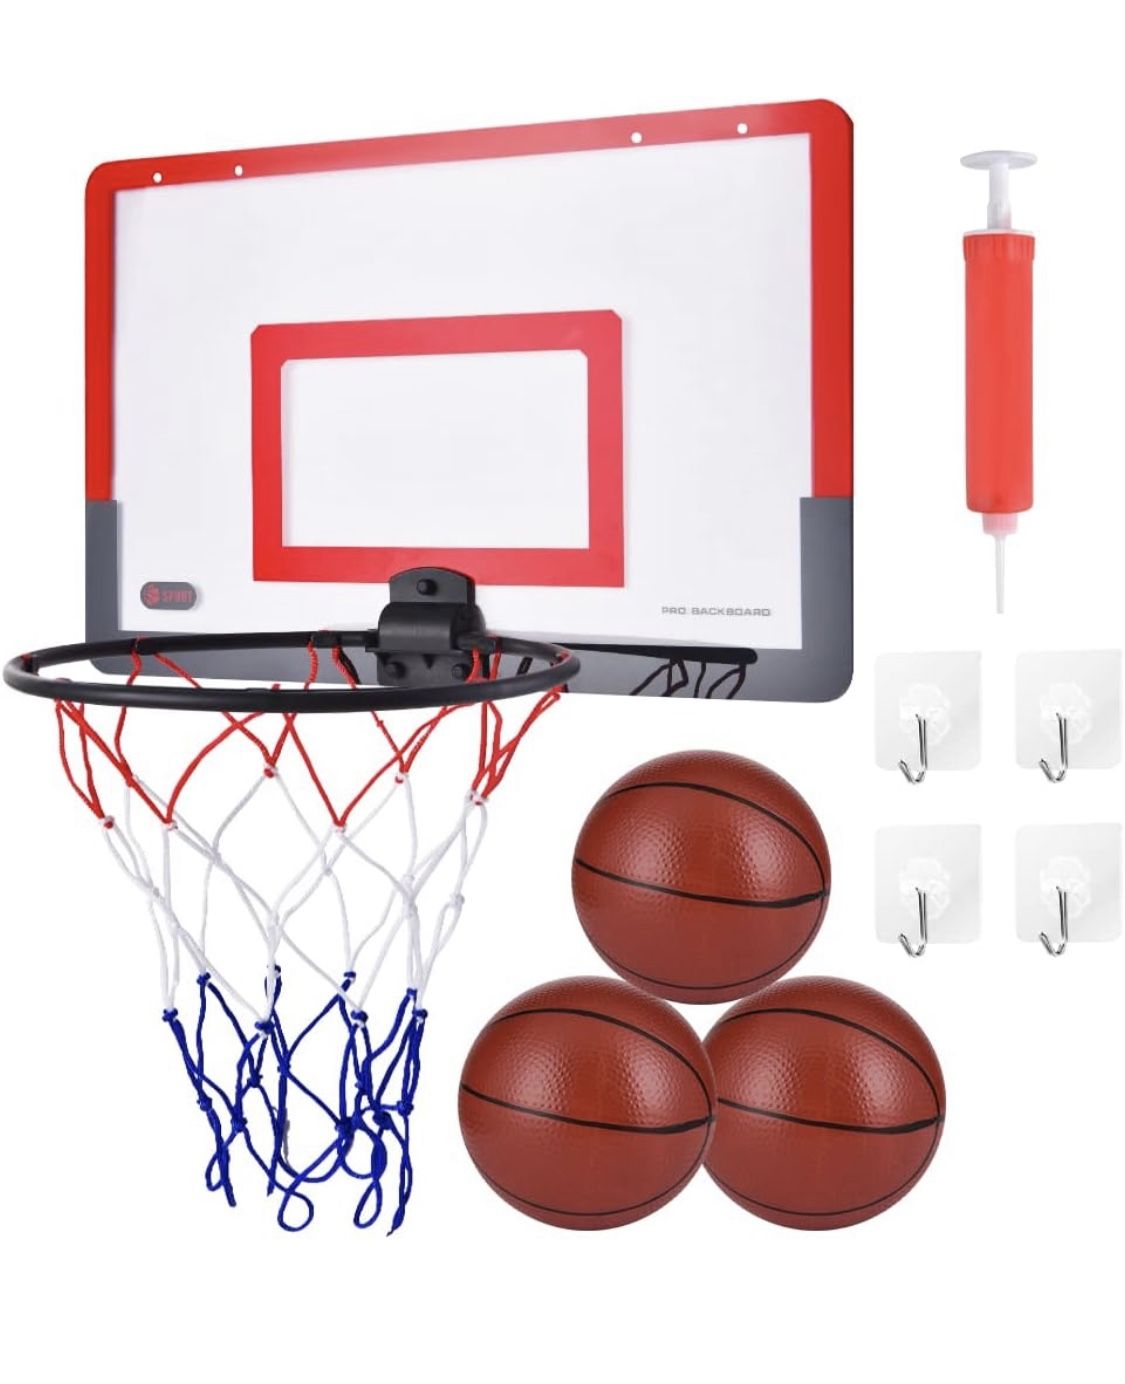 Basketball Hoop Indoor Outdoor Wall Mounted Mini Basket Ball Hoop Over The Door Wall for Kids Toy Gifts for Boys Girls Kids Portable